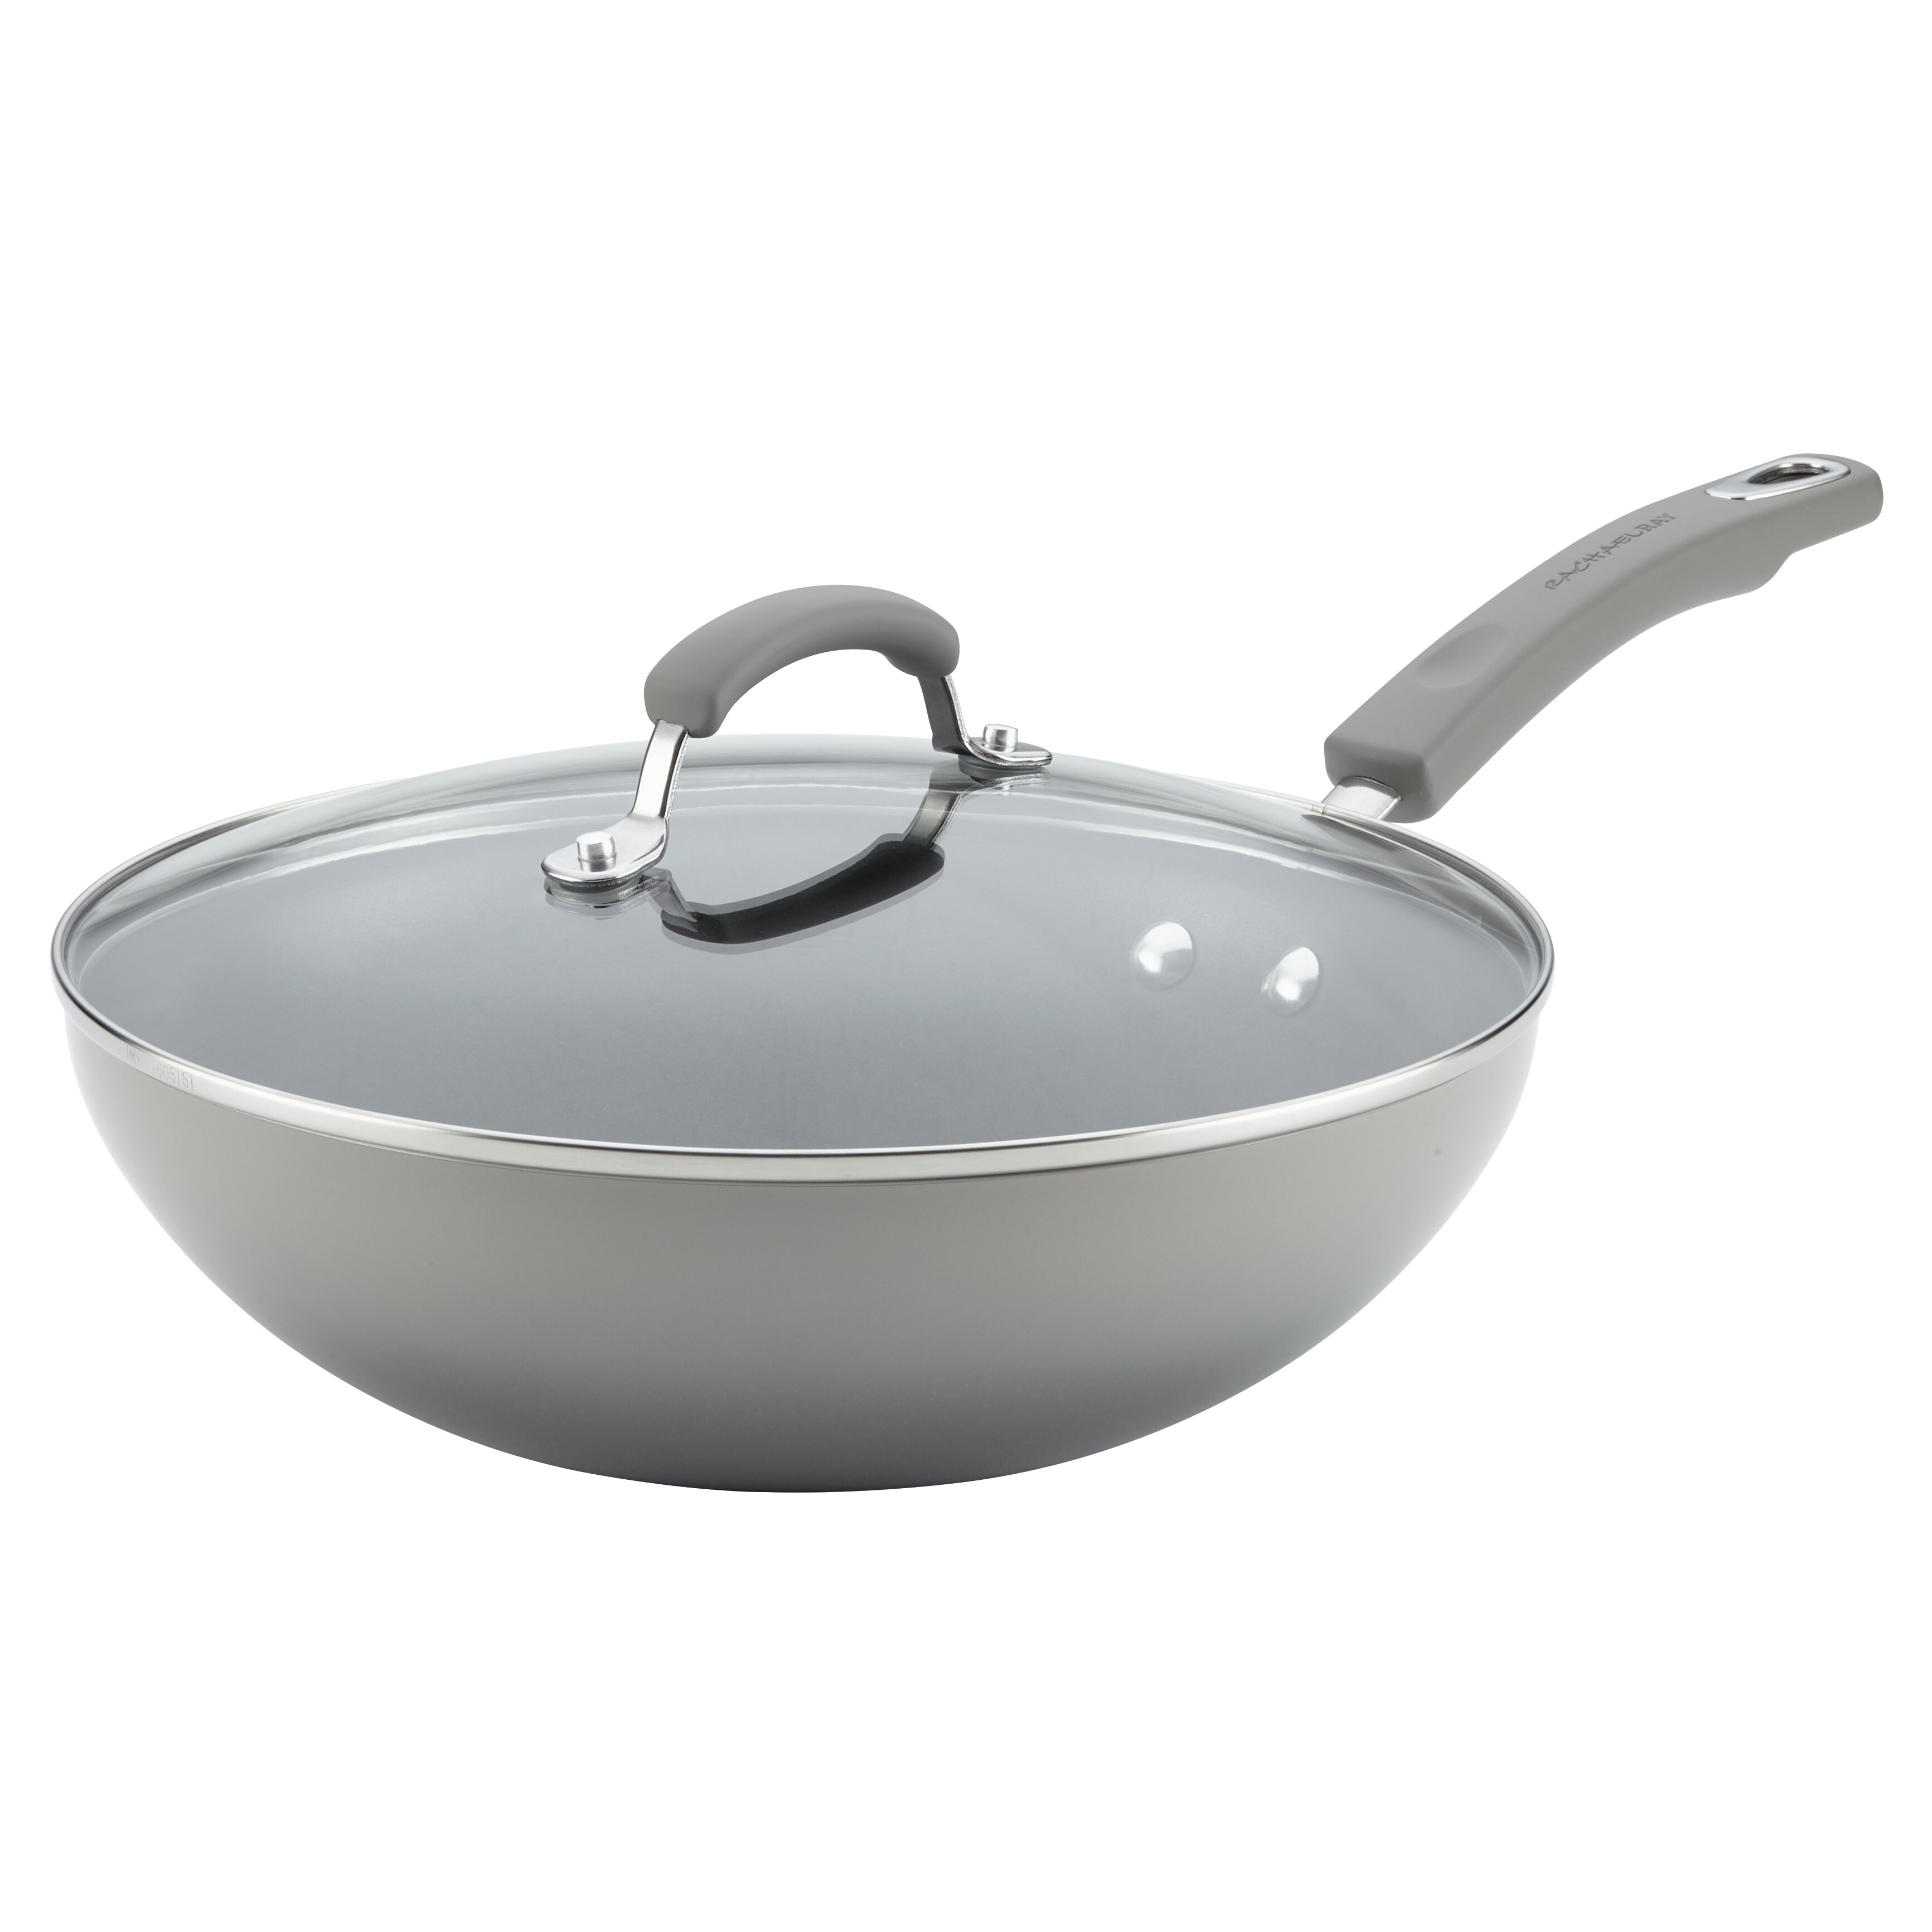 Aluminum Non-Stick Frying Pan/Fry Pan/Skillet Rachael Ray 12-Inch Get Cooking